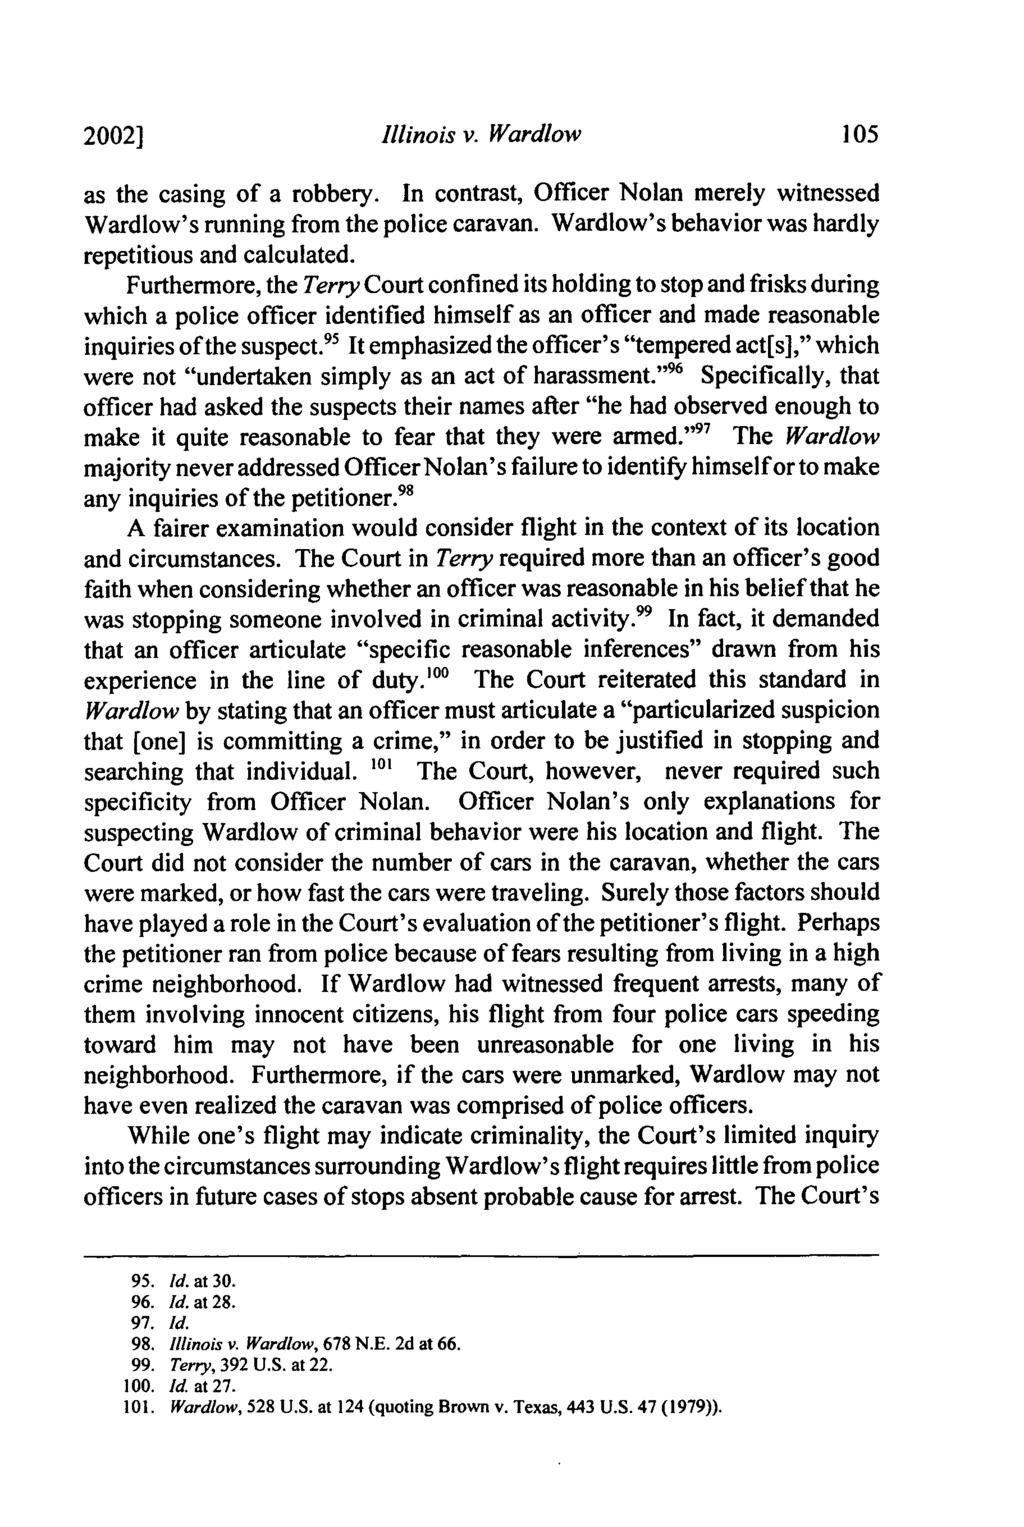 2002] Illinois v. Wardlow as the casing of a robbery. In contrast, Officer Nolan merely witnessed Wardlow's running from the police caravan. Wardlow's behavior was hardly repetitious and calculated.